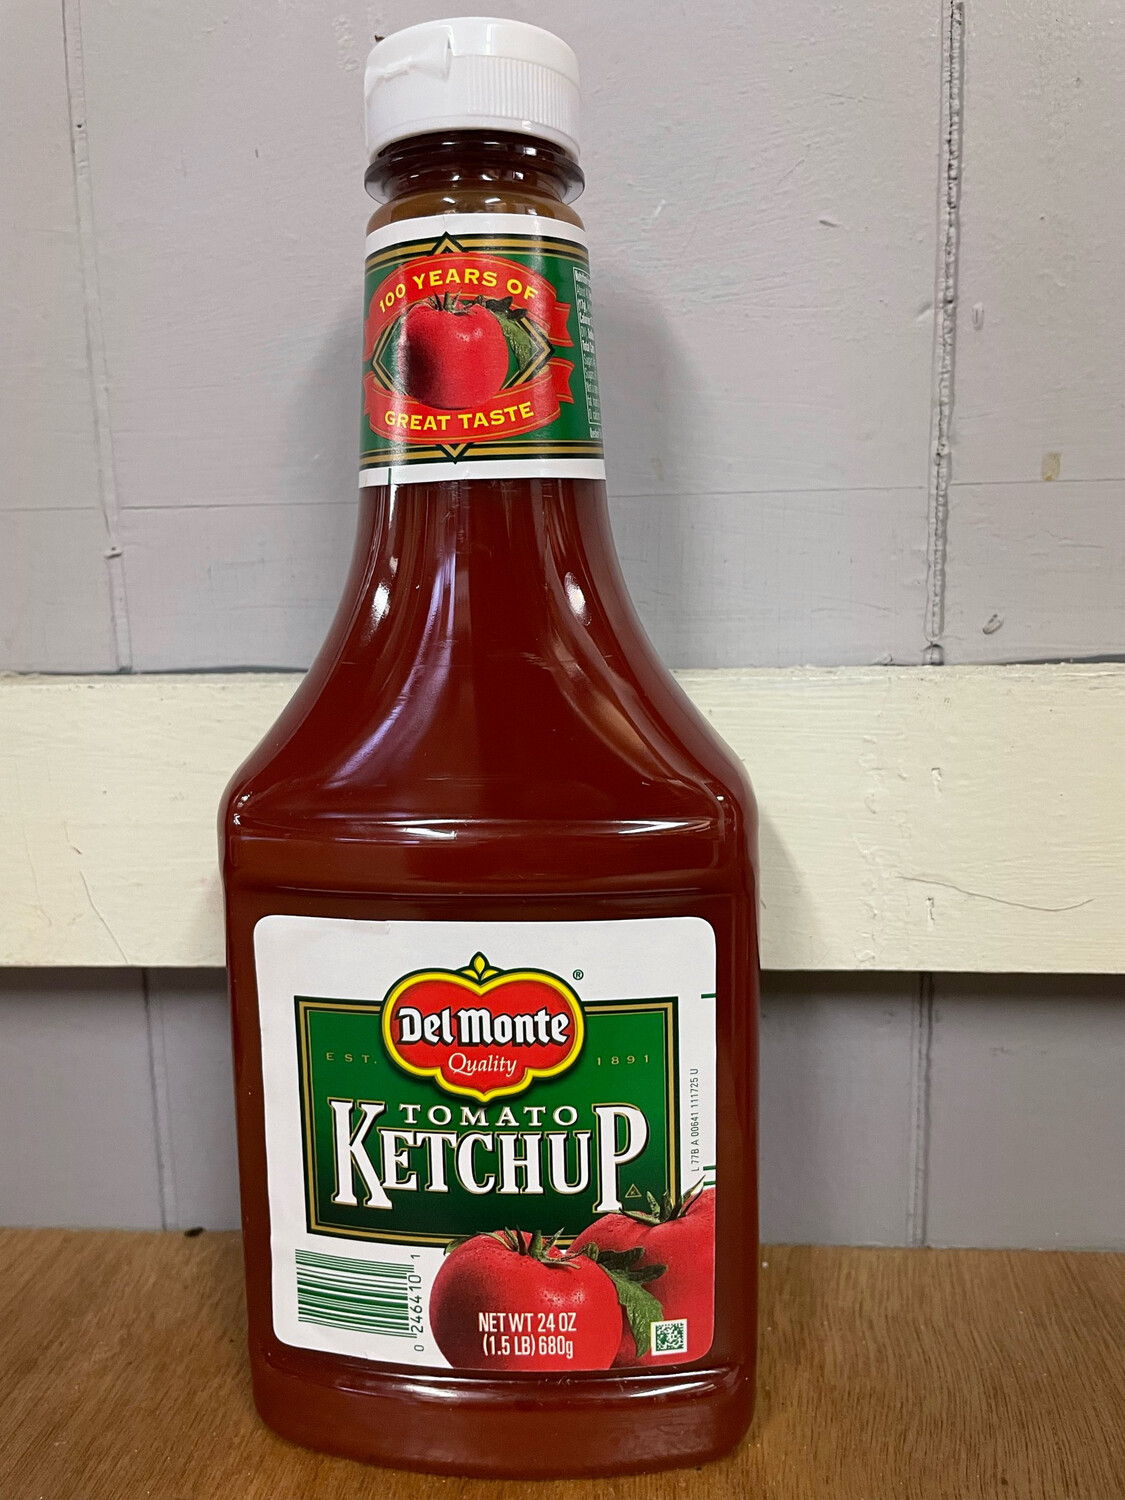 Ketchup
(*LIMIT 1 per household*)